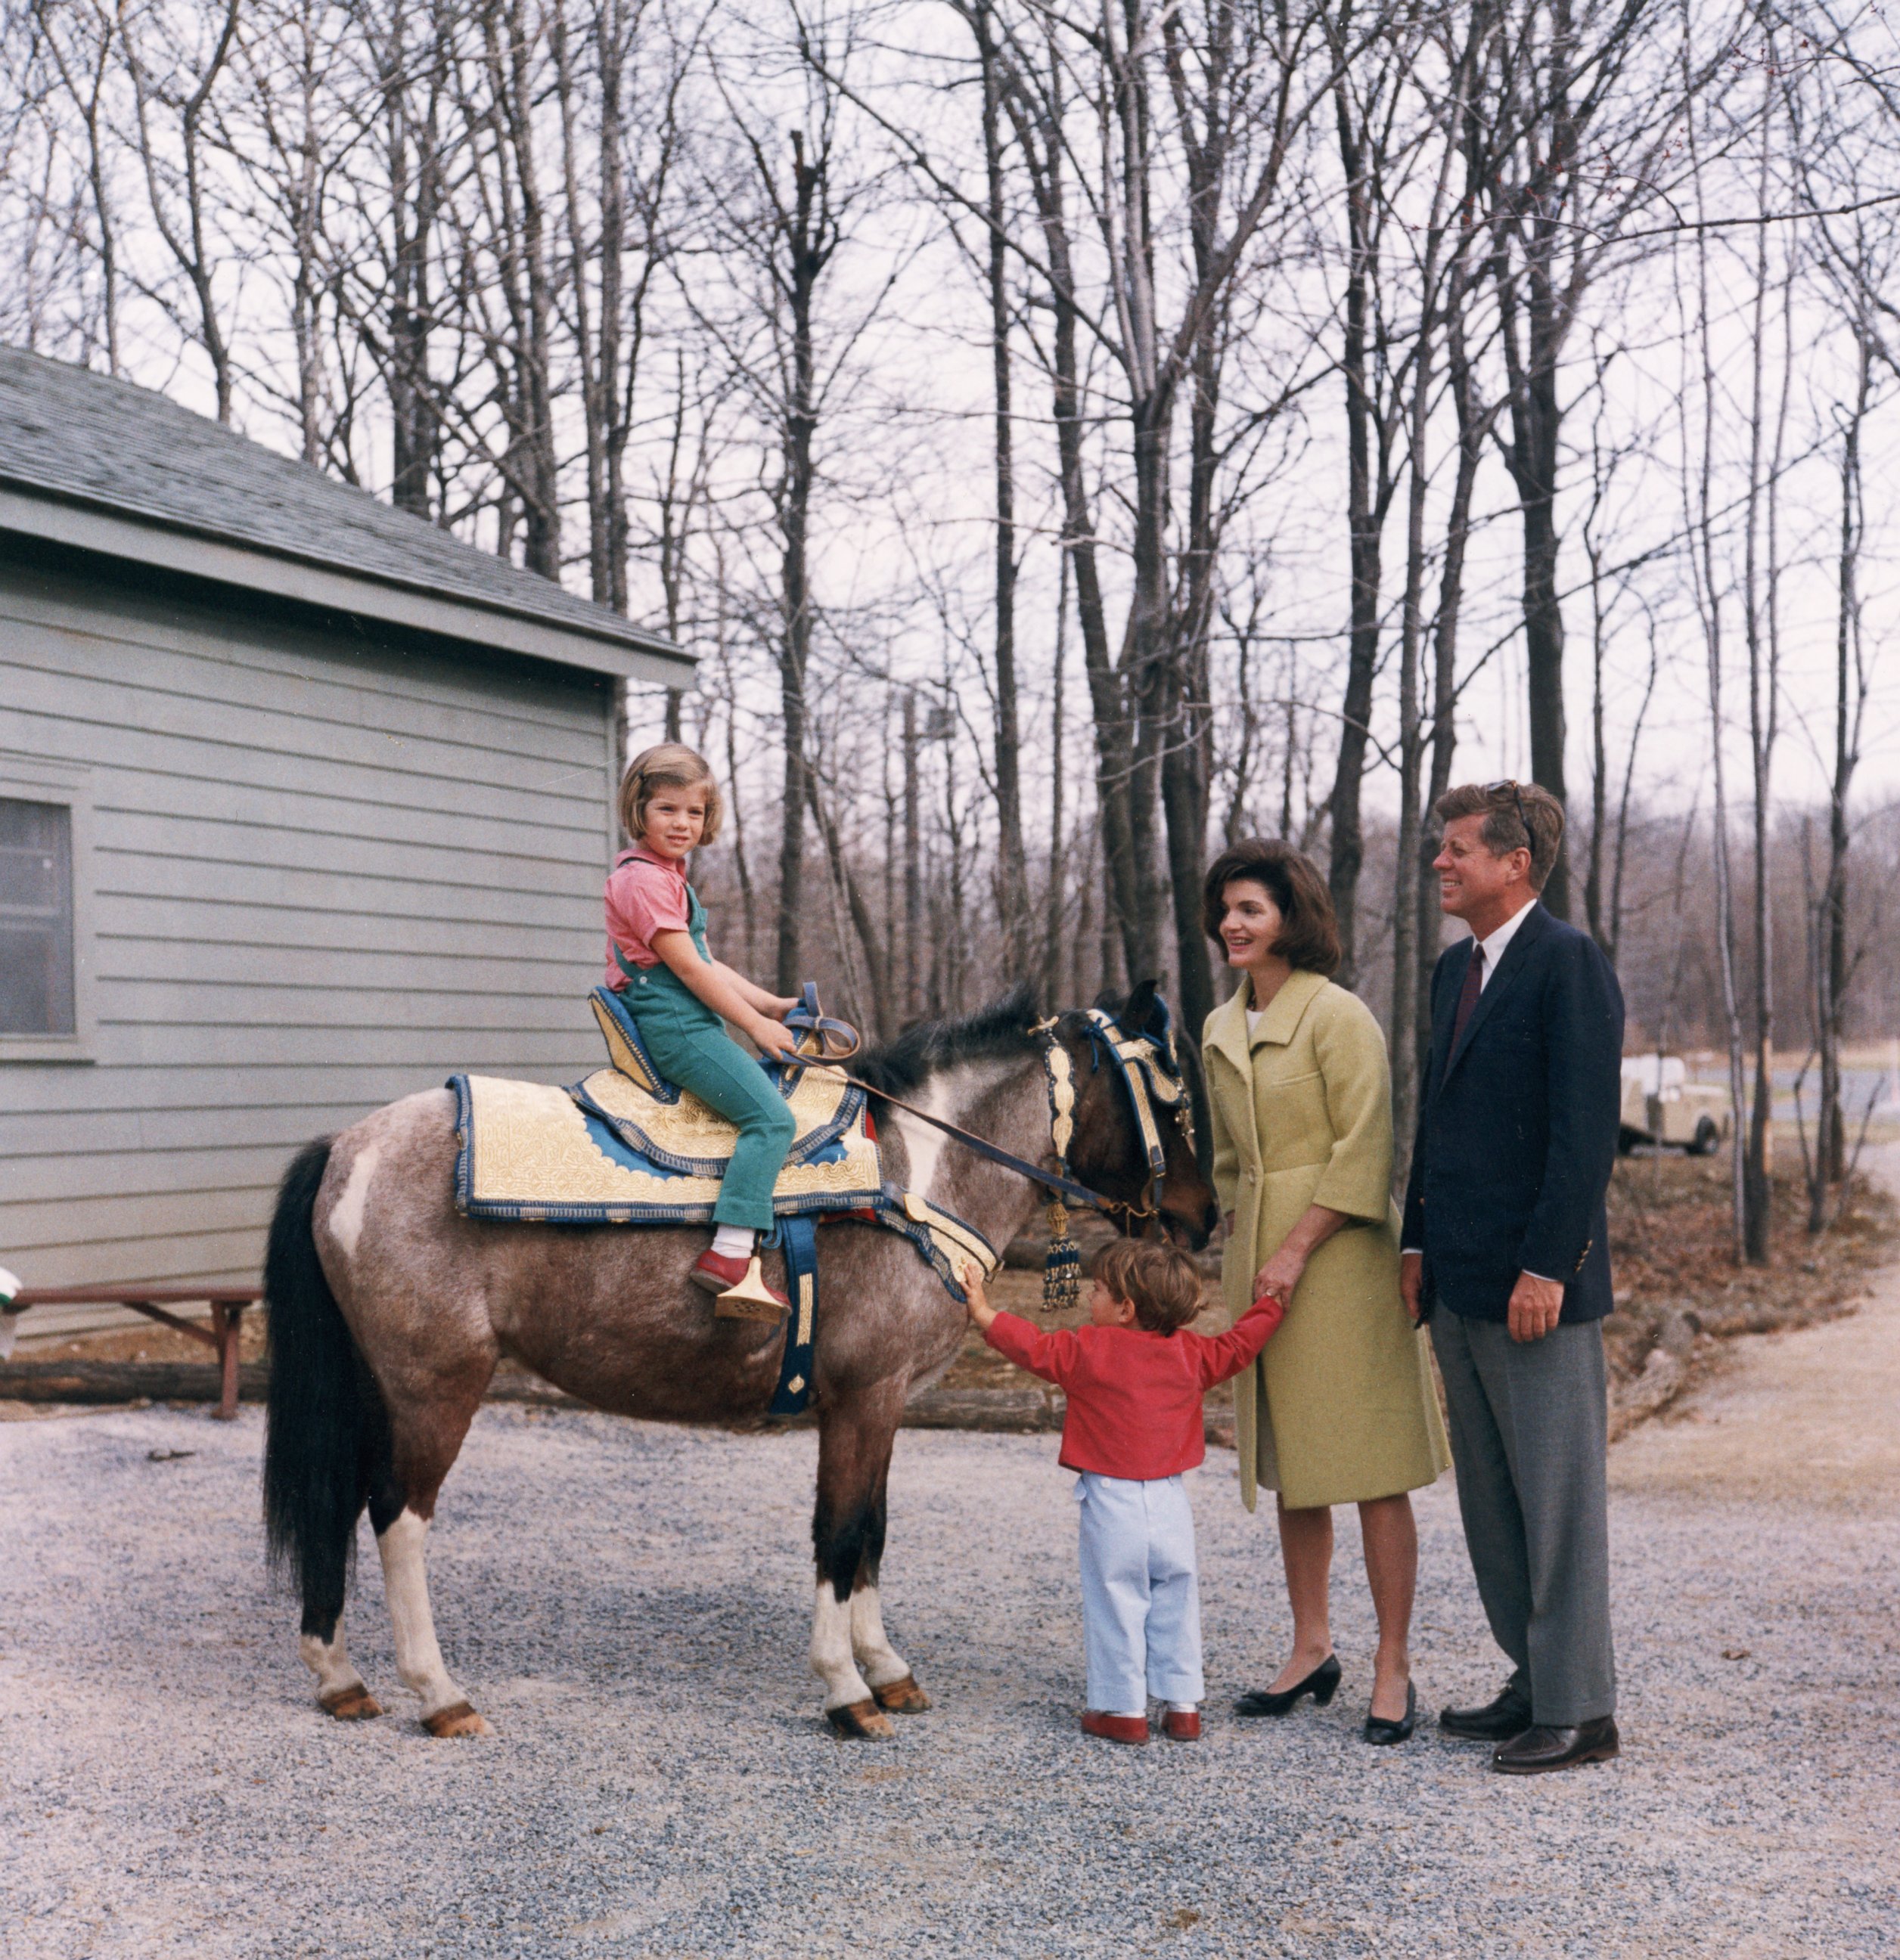 PHOTO: US President John F Kennedy stands with his wife, First Lady Jacqueline Bouvier Kennedy, as their daughter, Caroline, sits atop a pony and their son, John Jr. holds his arms out, March 31, 1963.